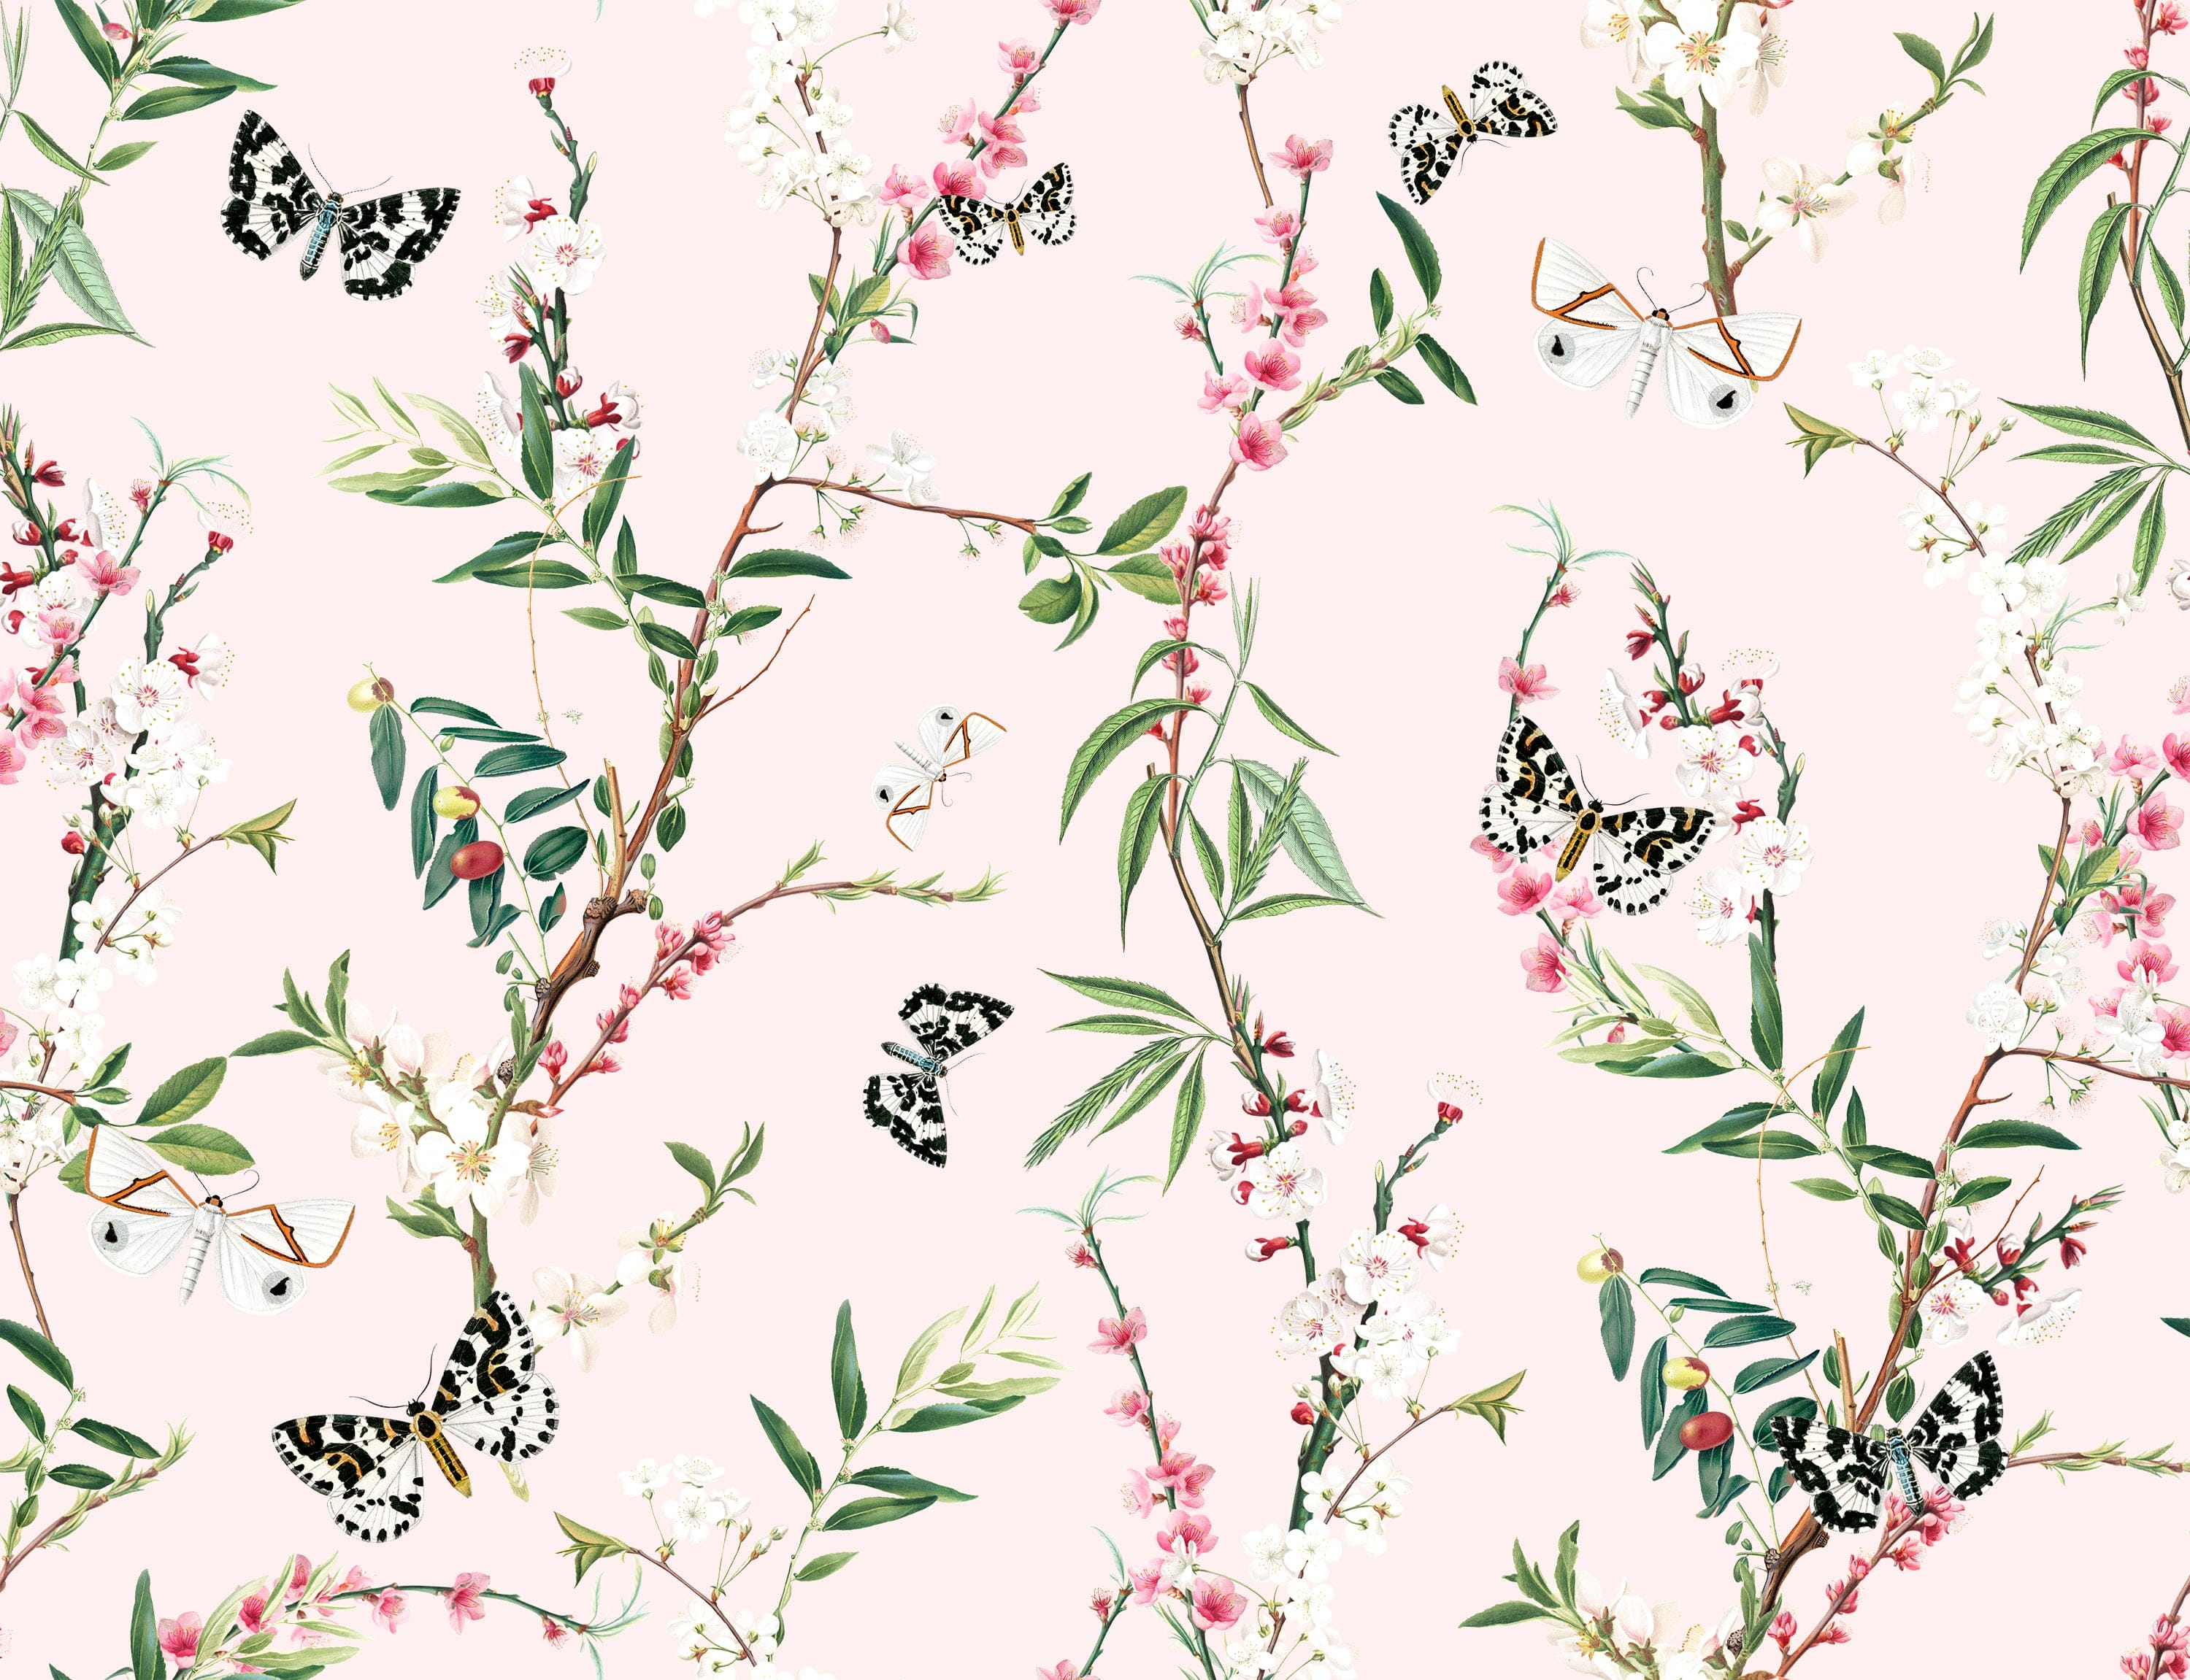 A detailed view of the Enchanting Butterflies Wallpaper, showcasing its intricate design of butterflies and blooming branches on a soft pink background. The delicate pattern features black and white butterflies and vibrant green leaves, creating a whimsical and serene ambiance.